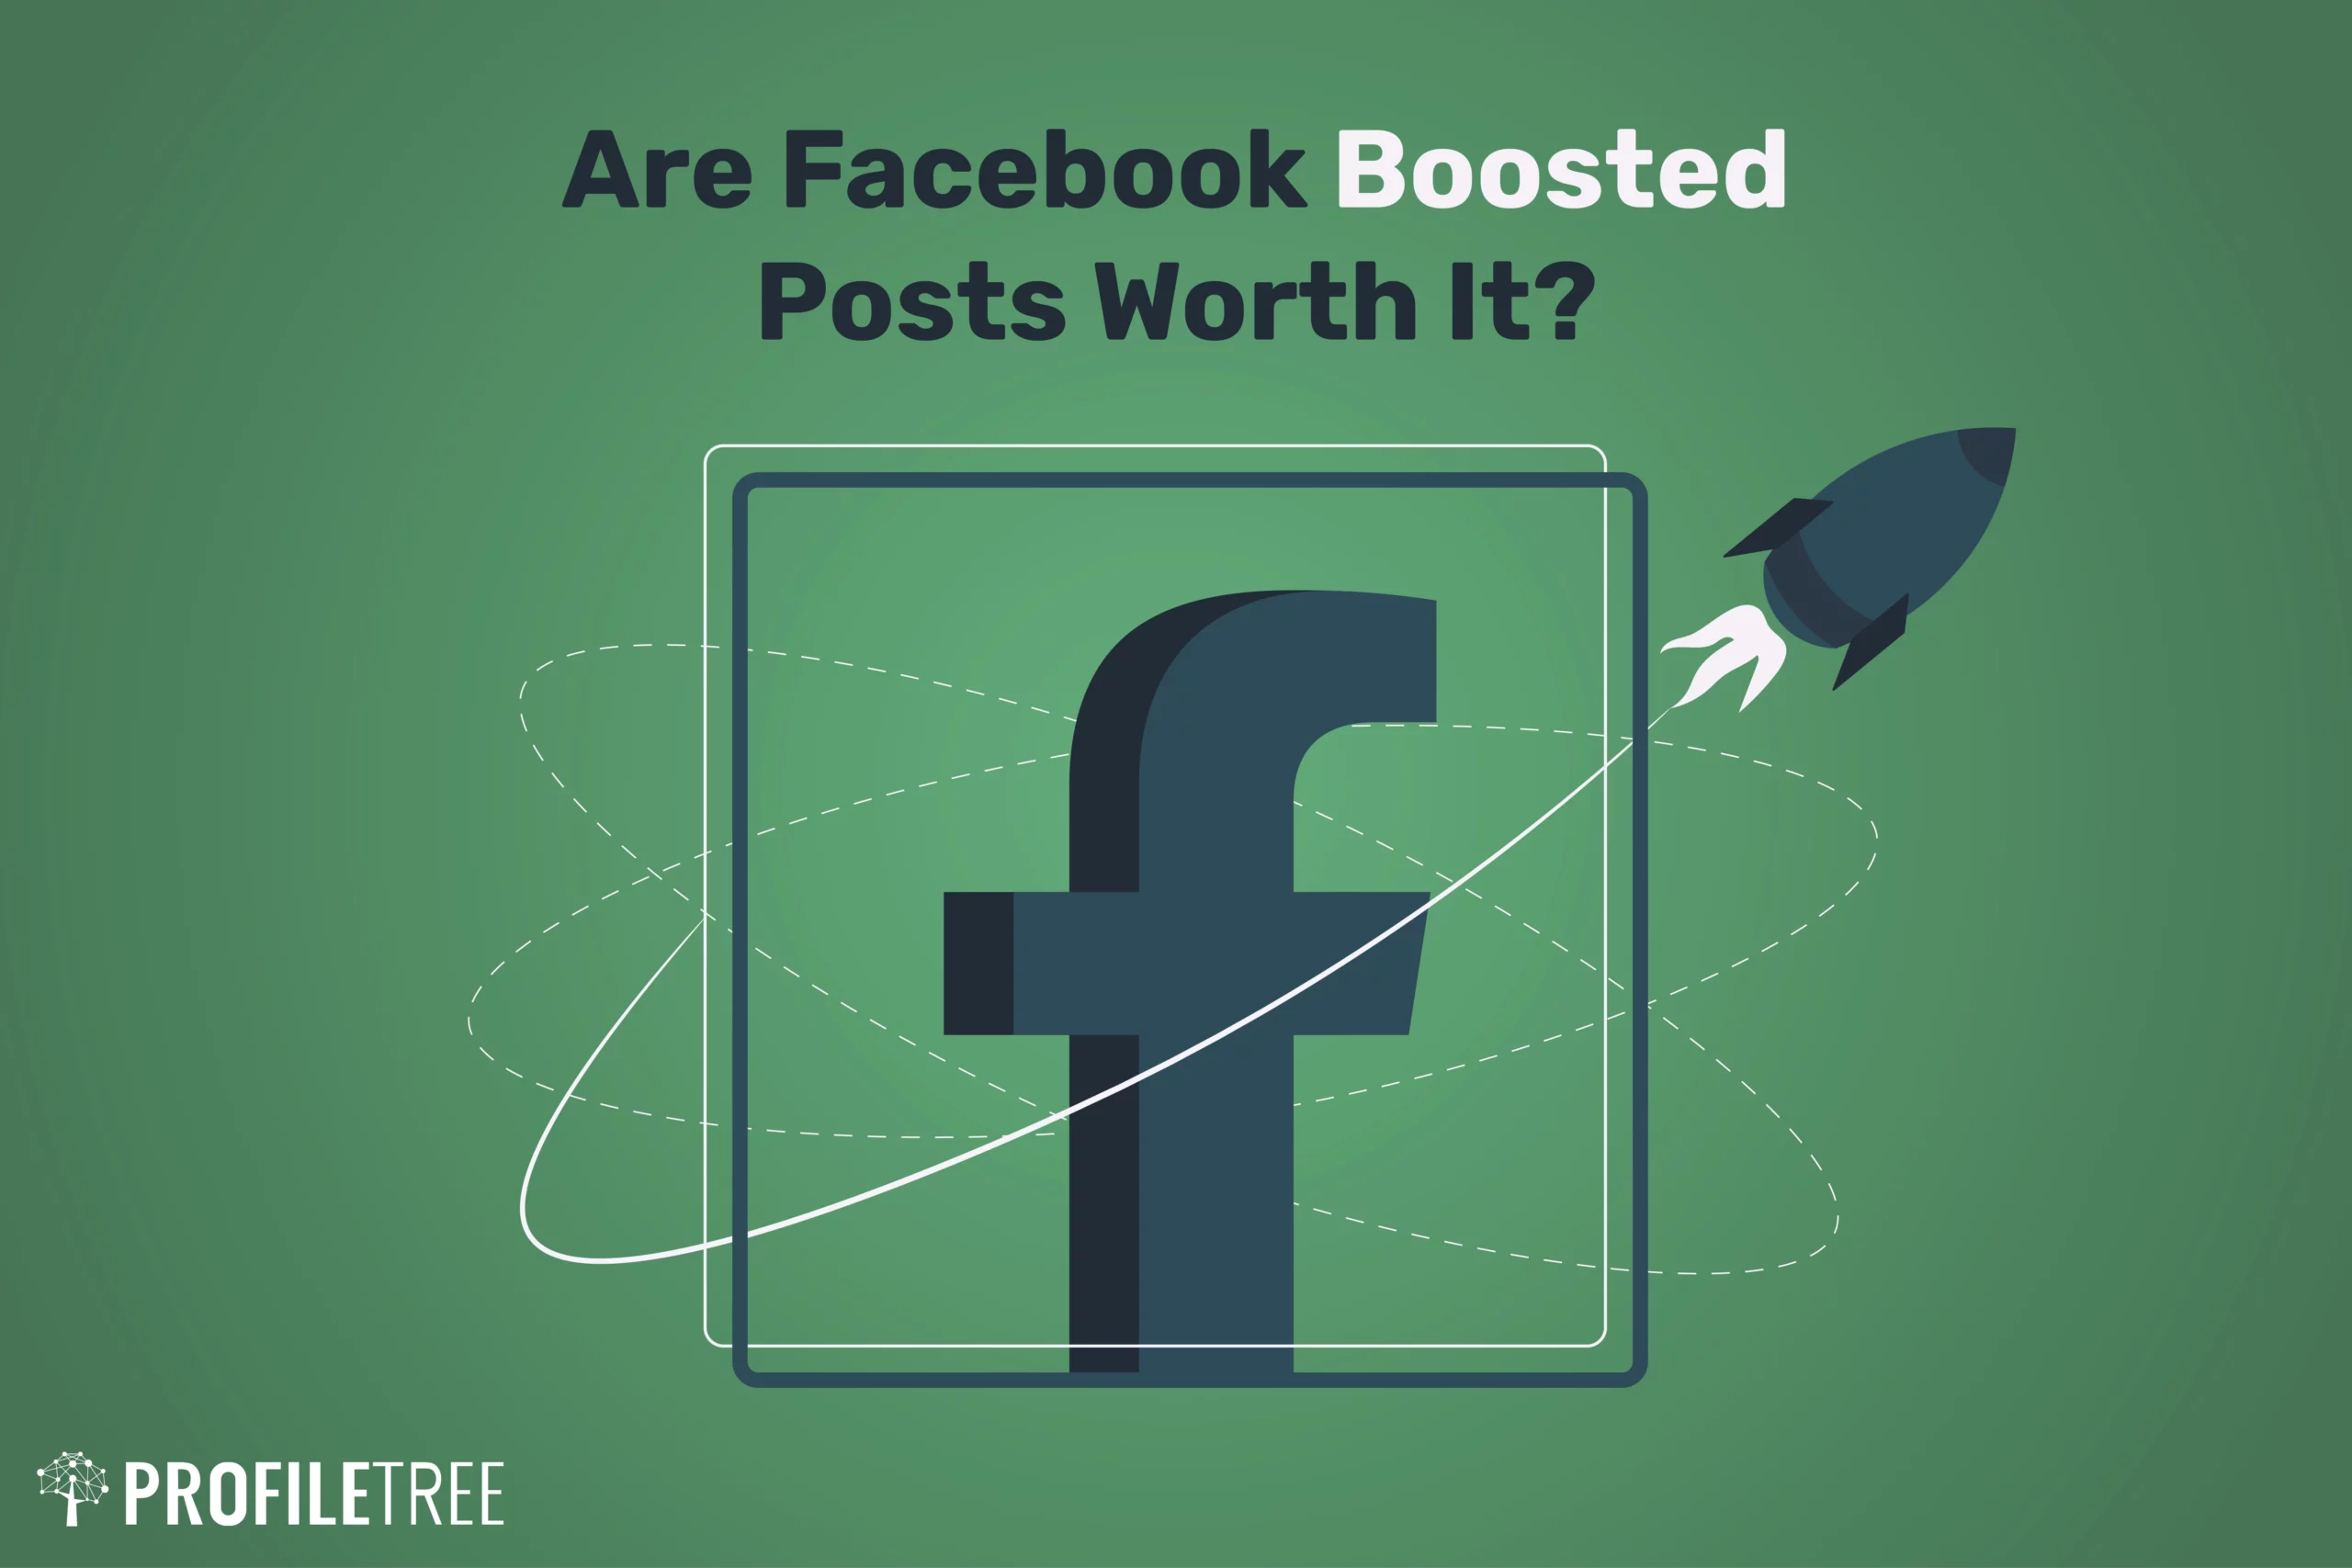 Facebook Boosted Posts